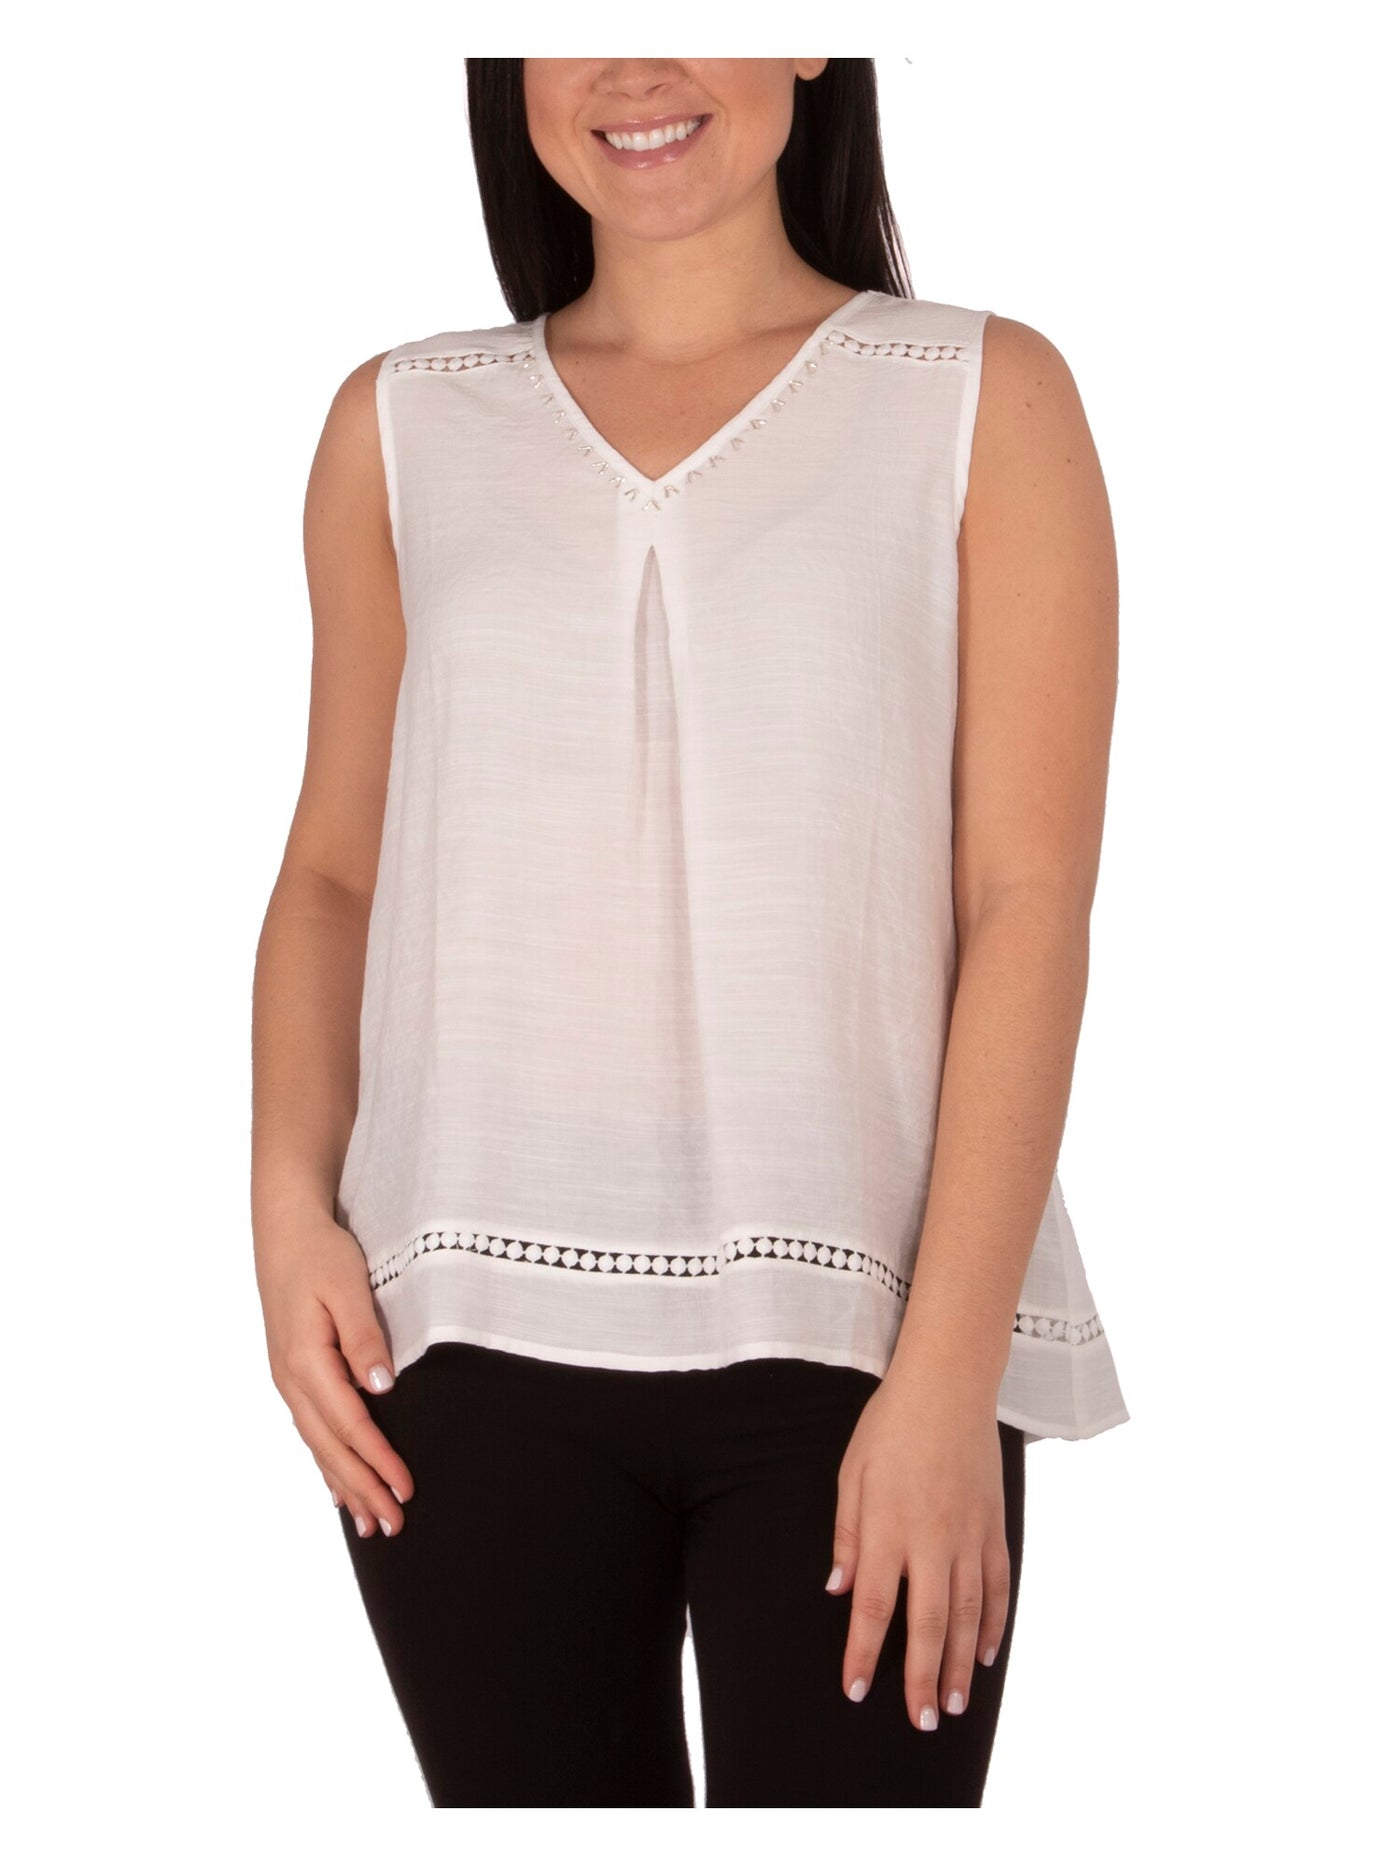 NY COLLECTION Womens White Embellished Sleeveless V Neck Top L